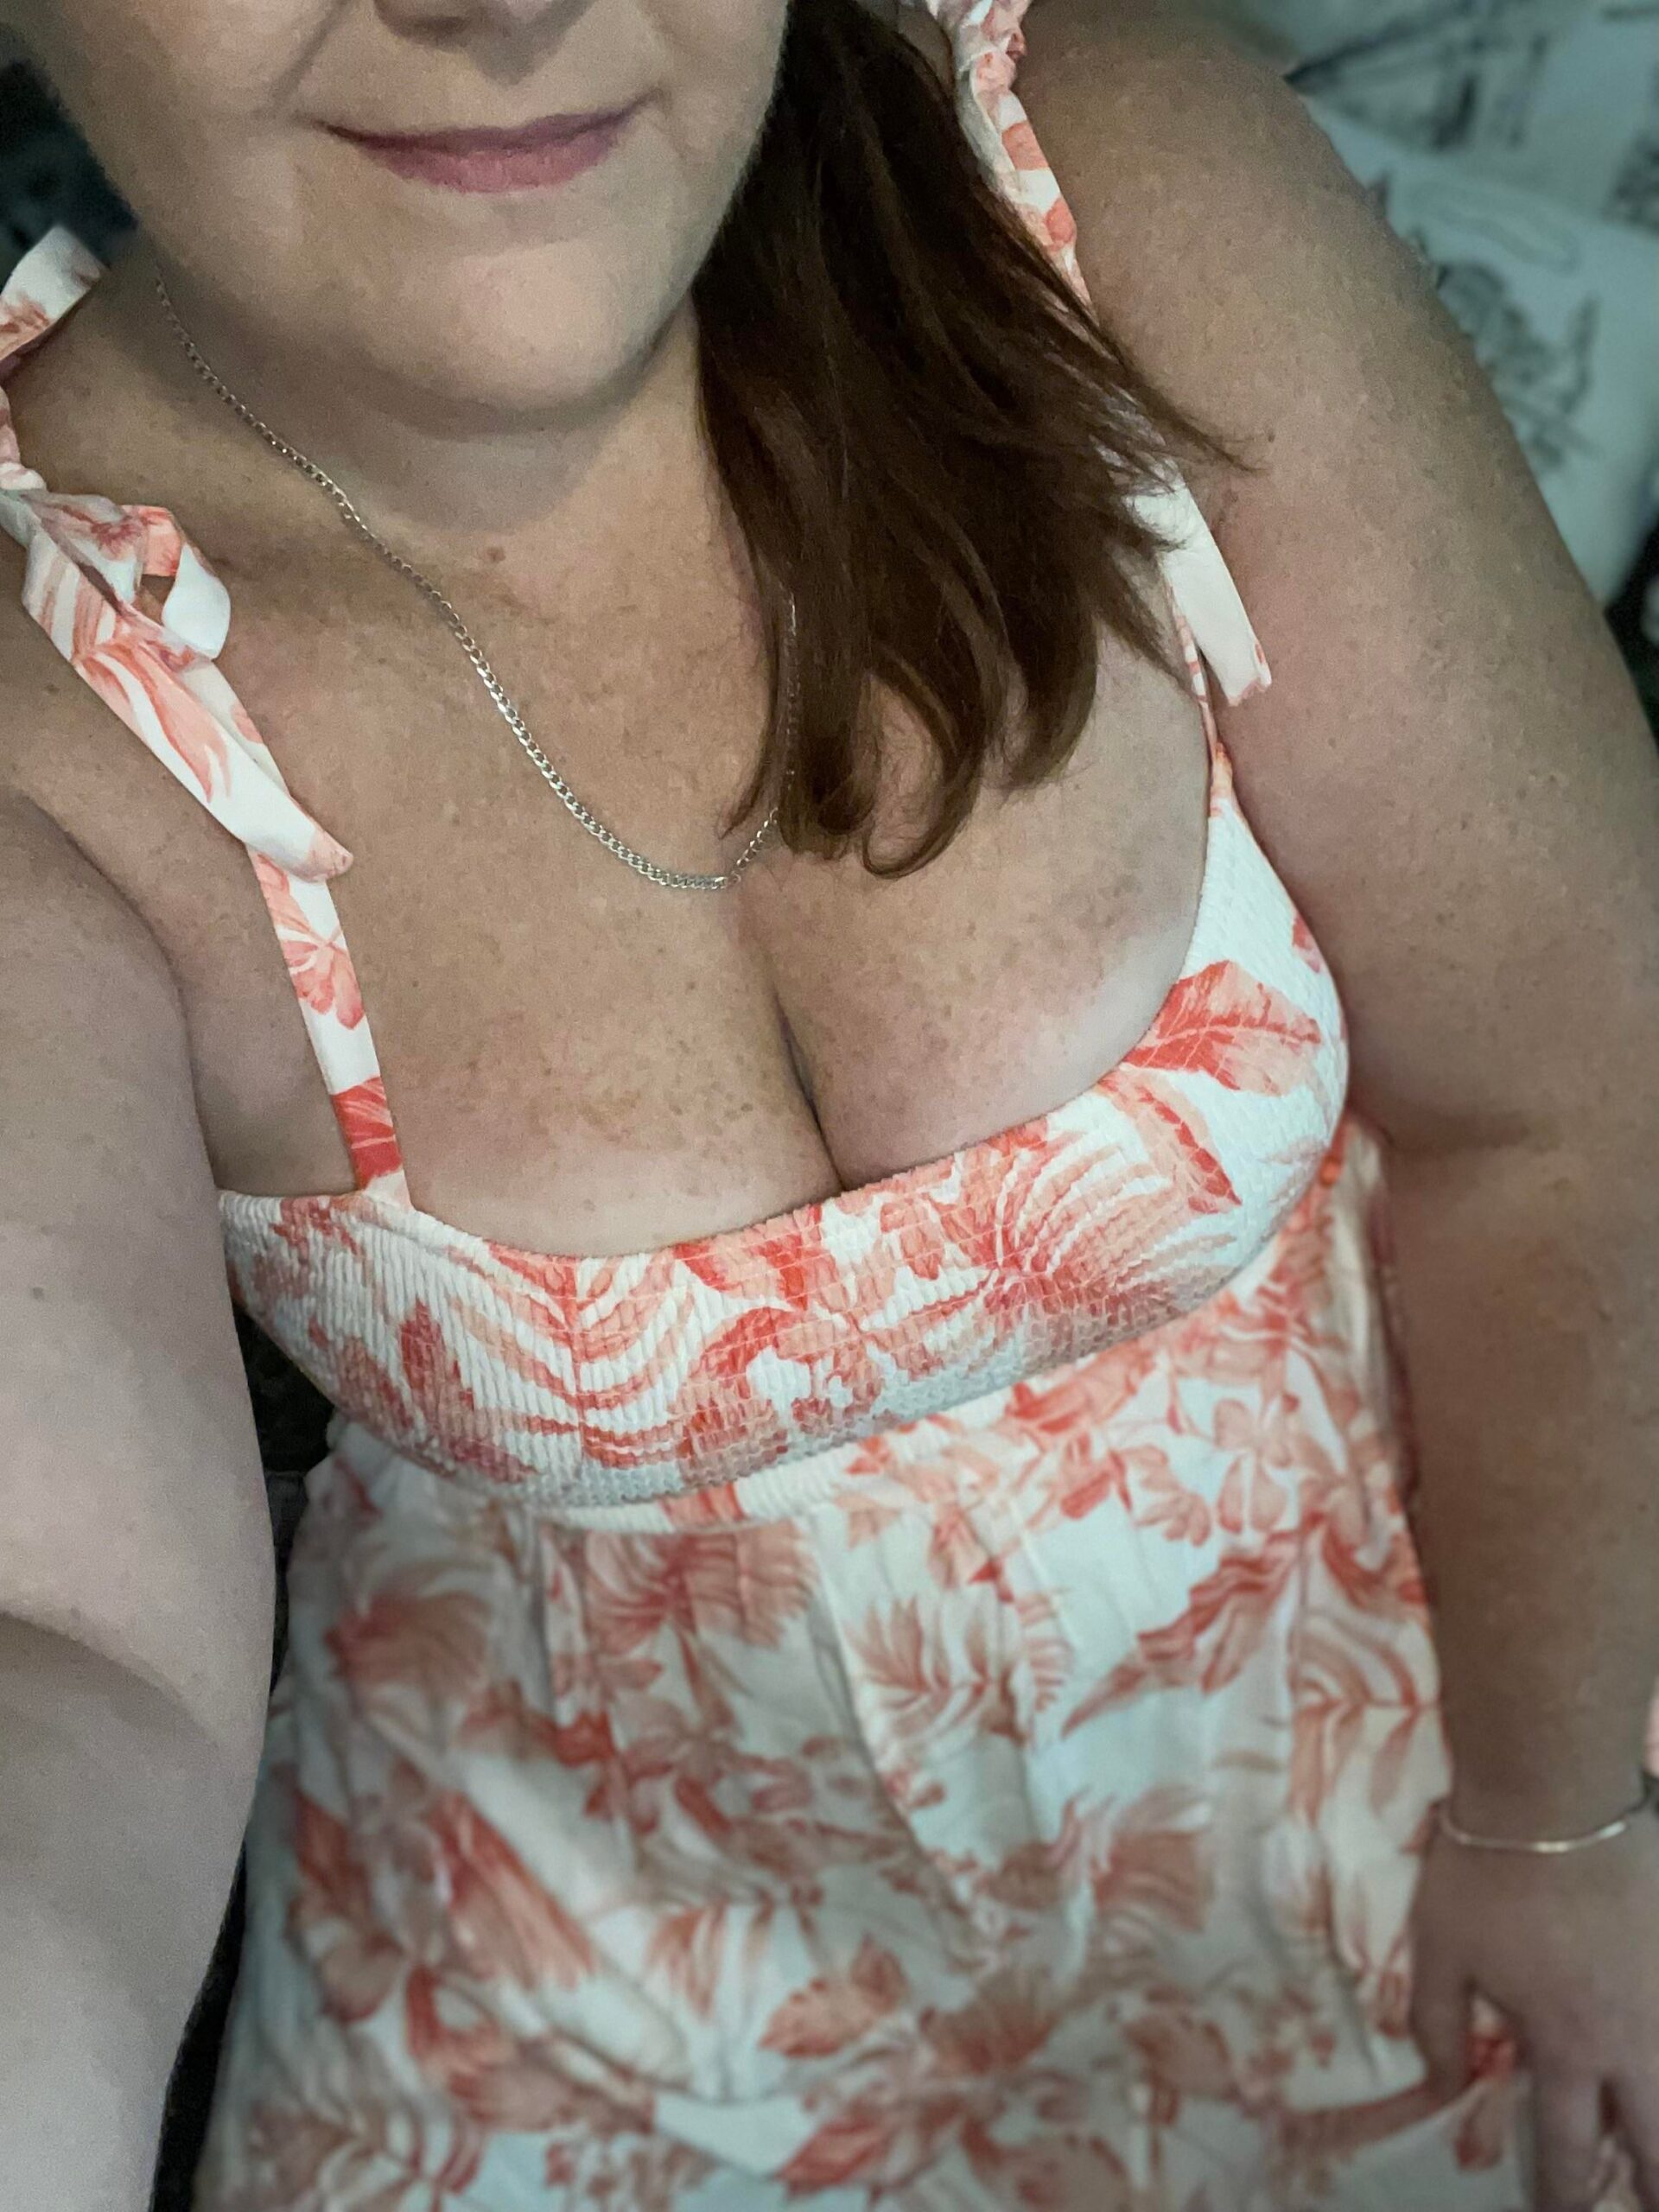 BBW boobs -  Let’s play a game called “what am I wearing under my dress?” 😉